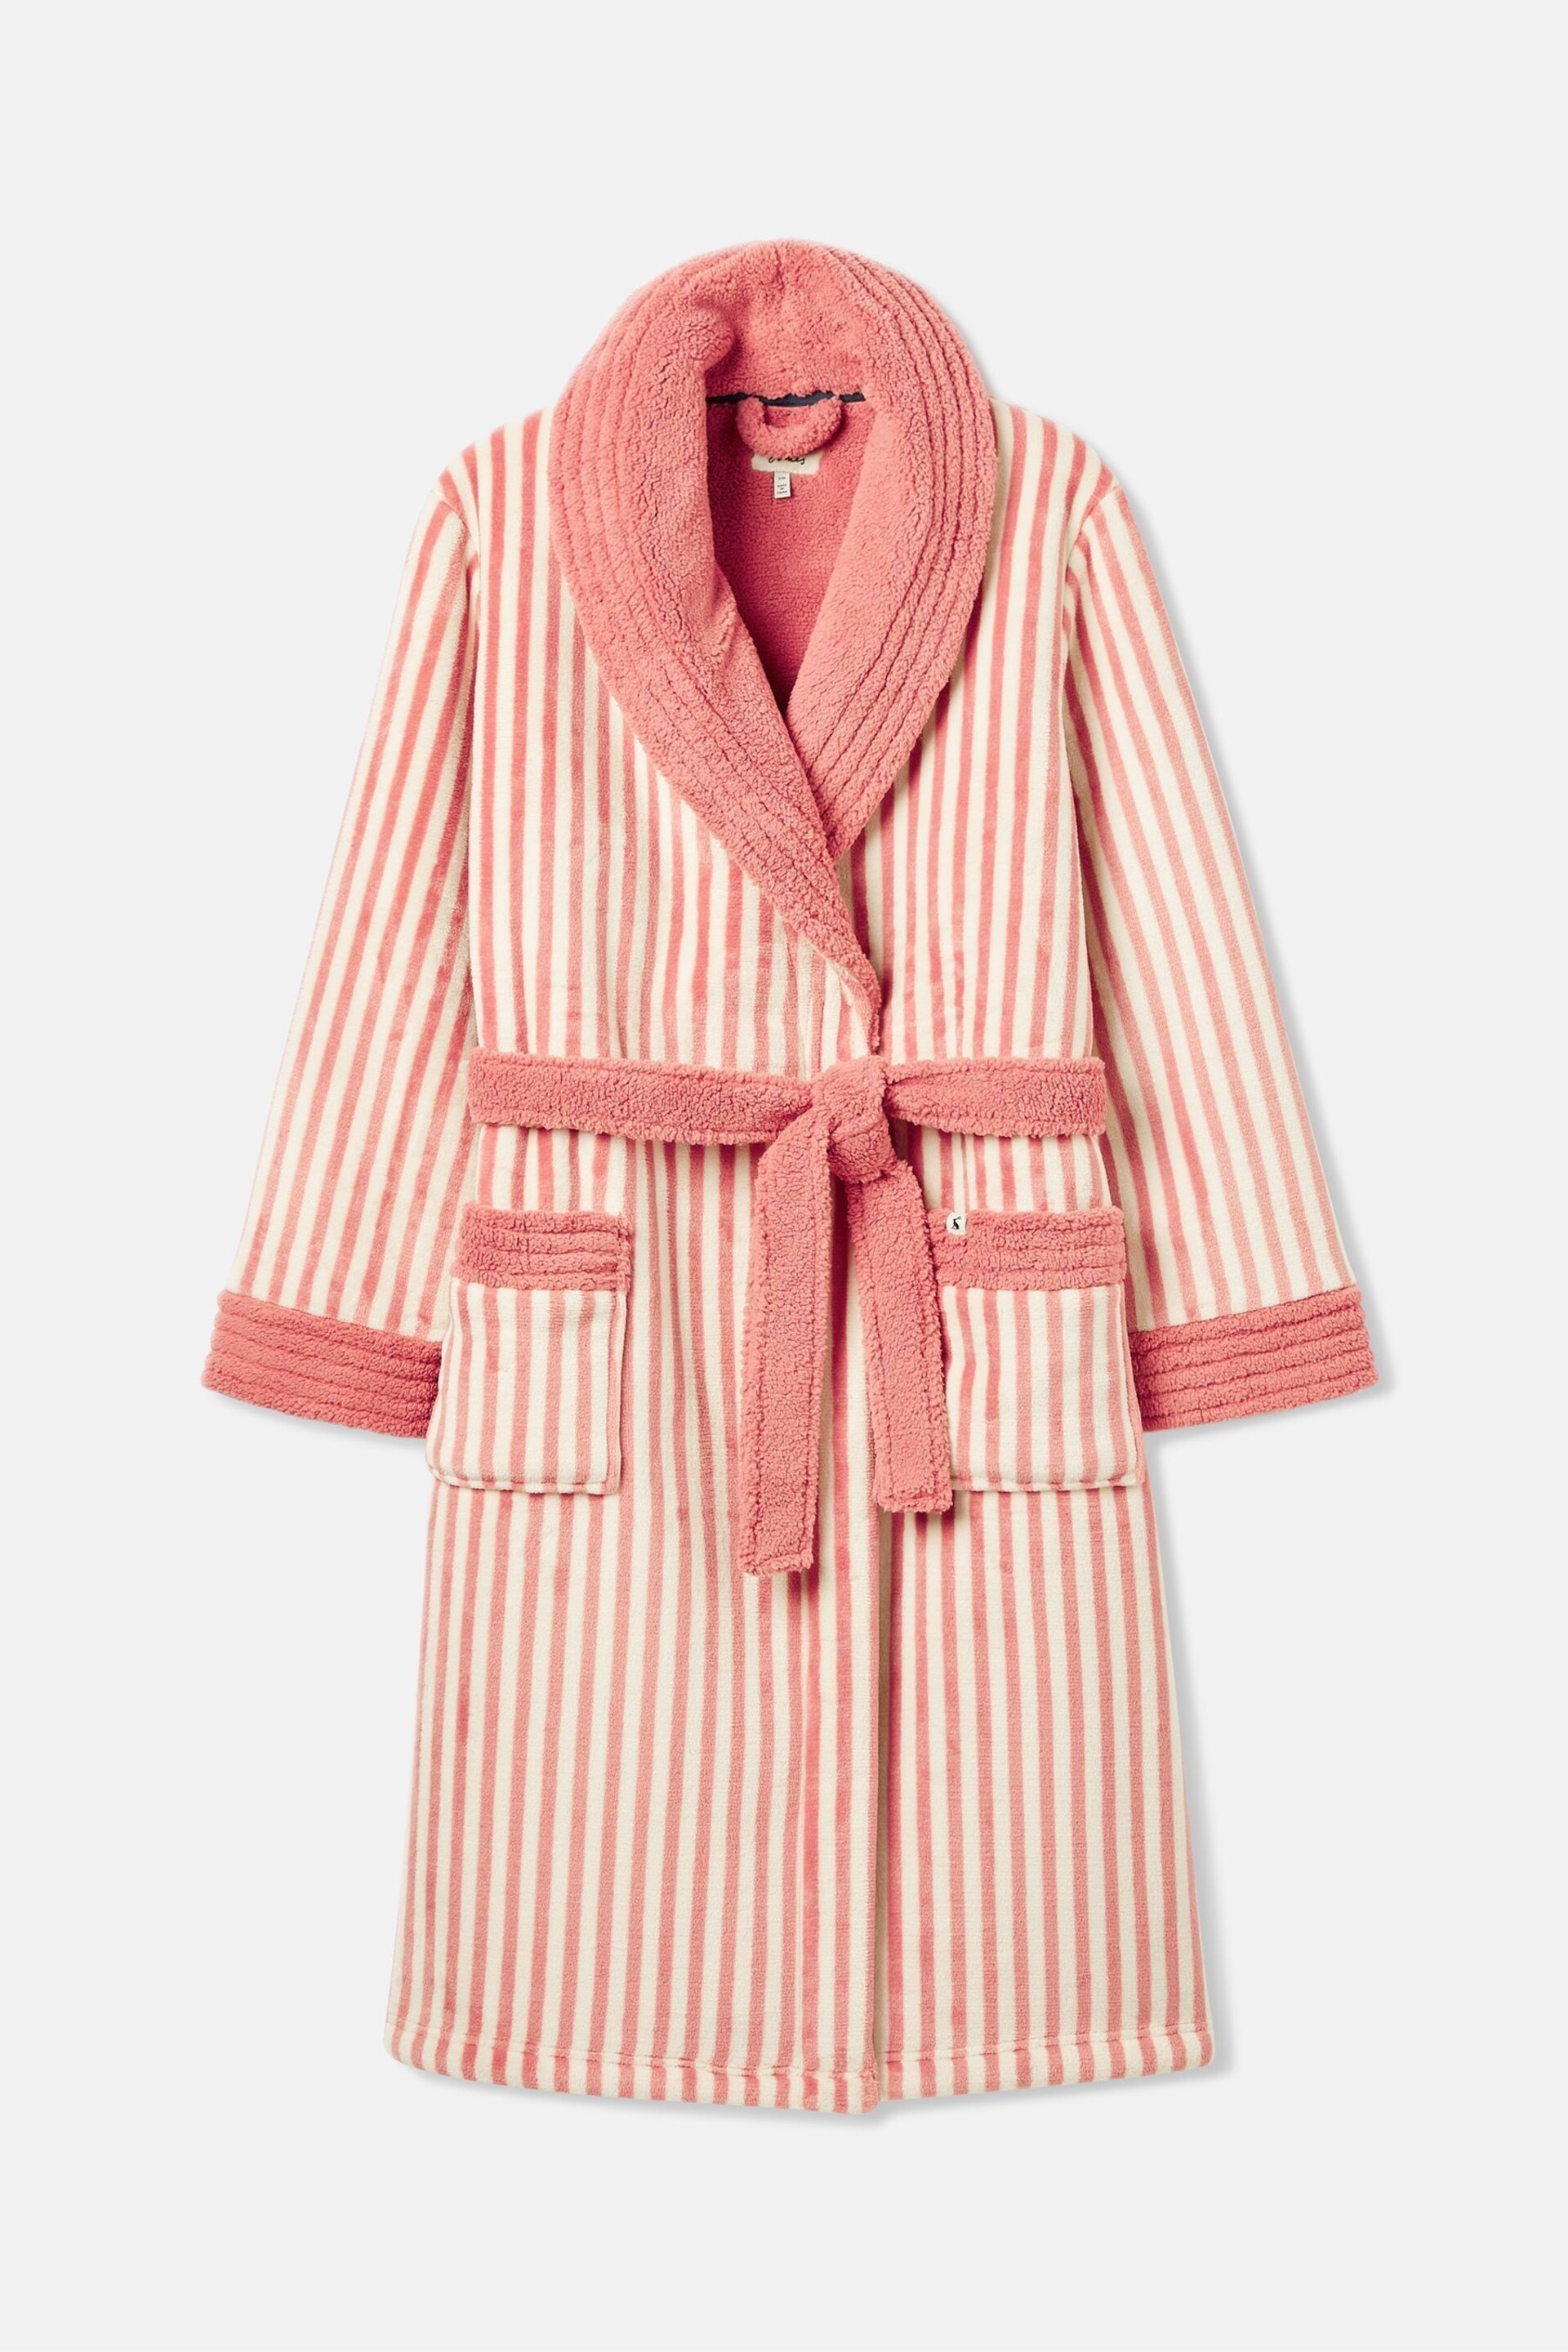 Joules Matilda Pink Fleece Lined Striped Dressing Gown - Image 6 of 6